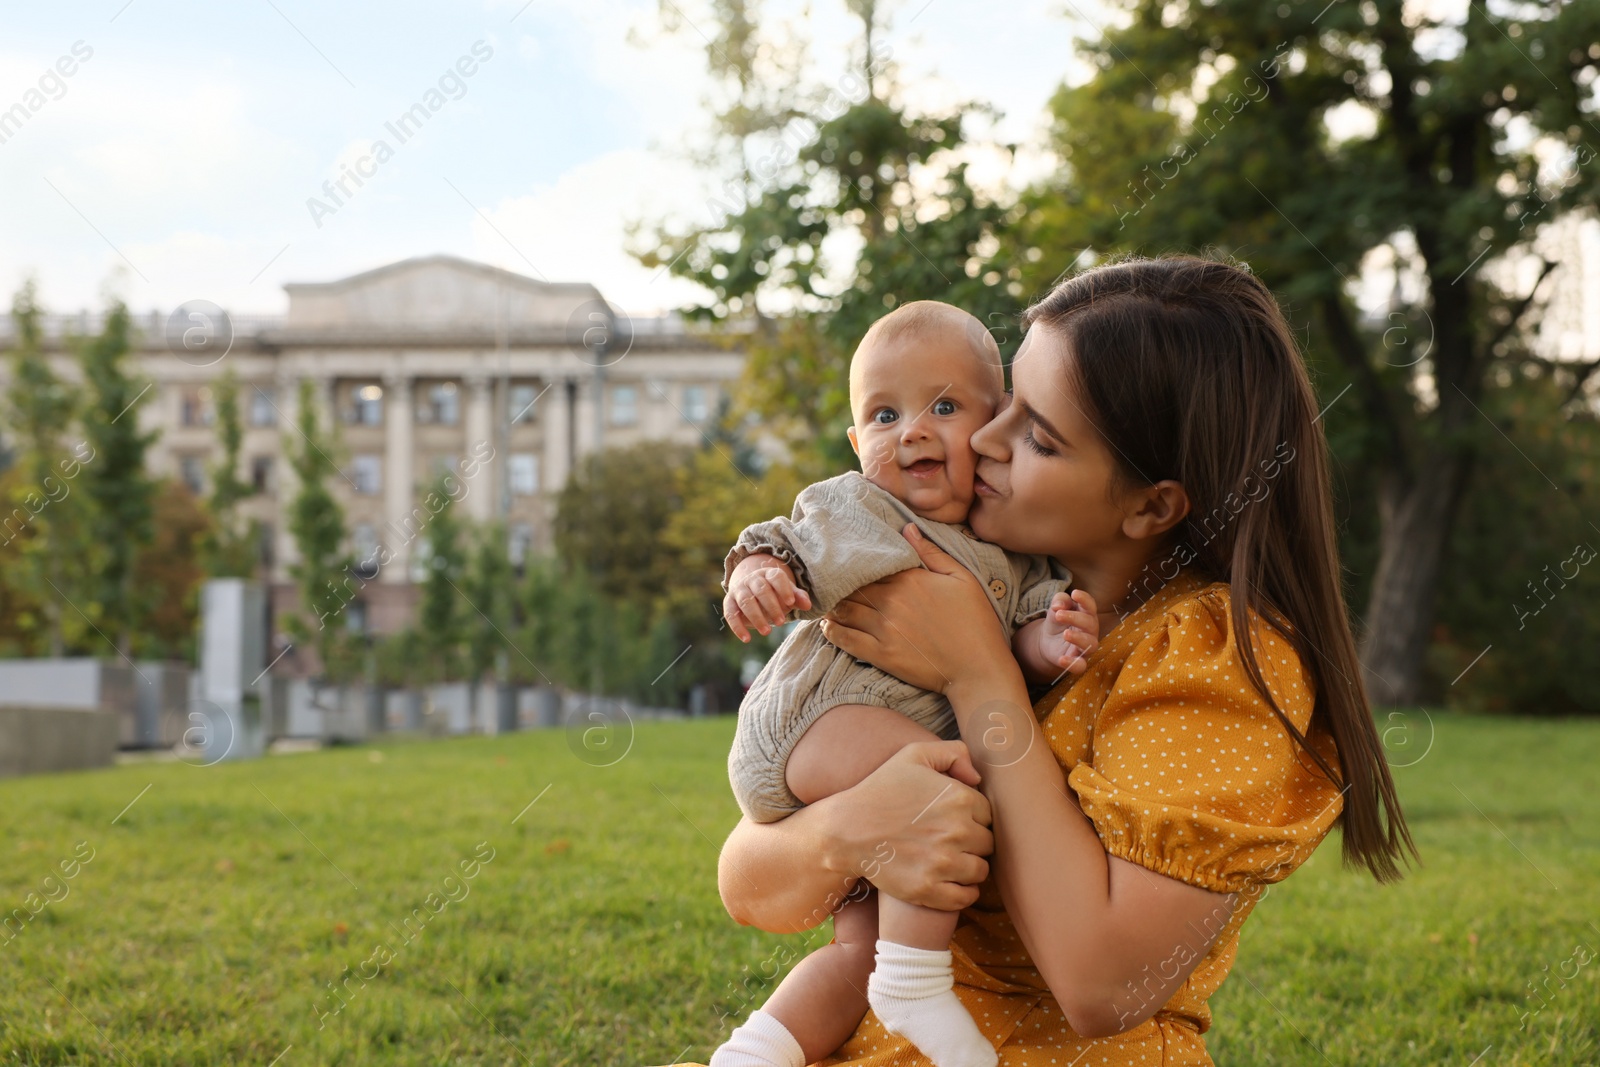 Photo of Happy mother with adorable baby walking in park on sunny day, space for text